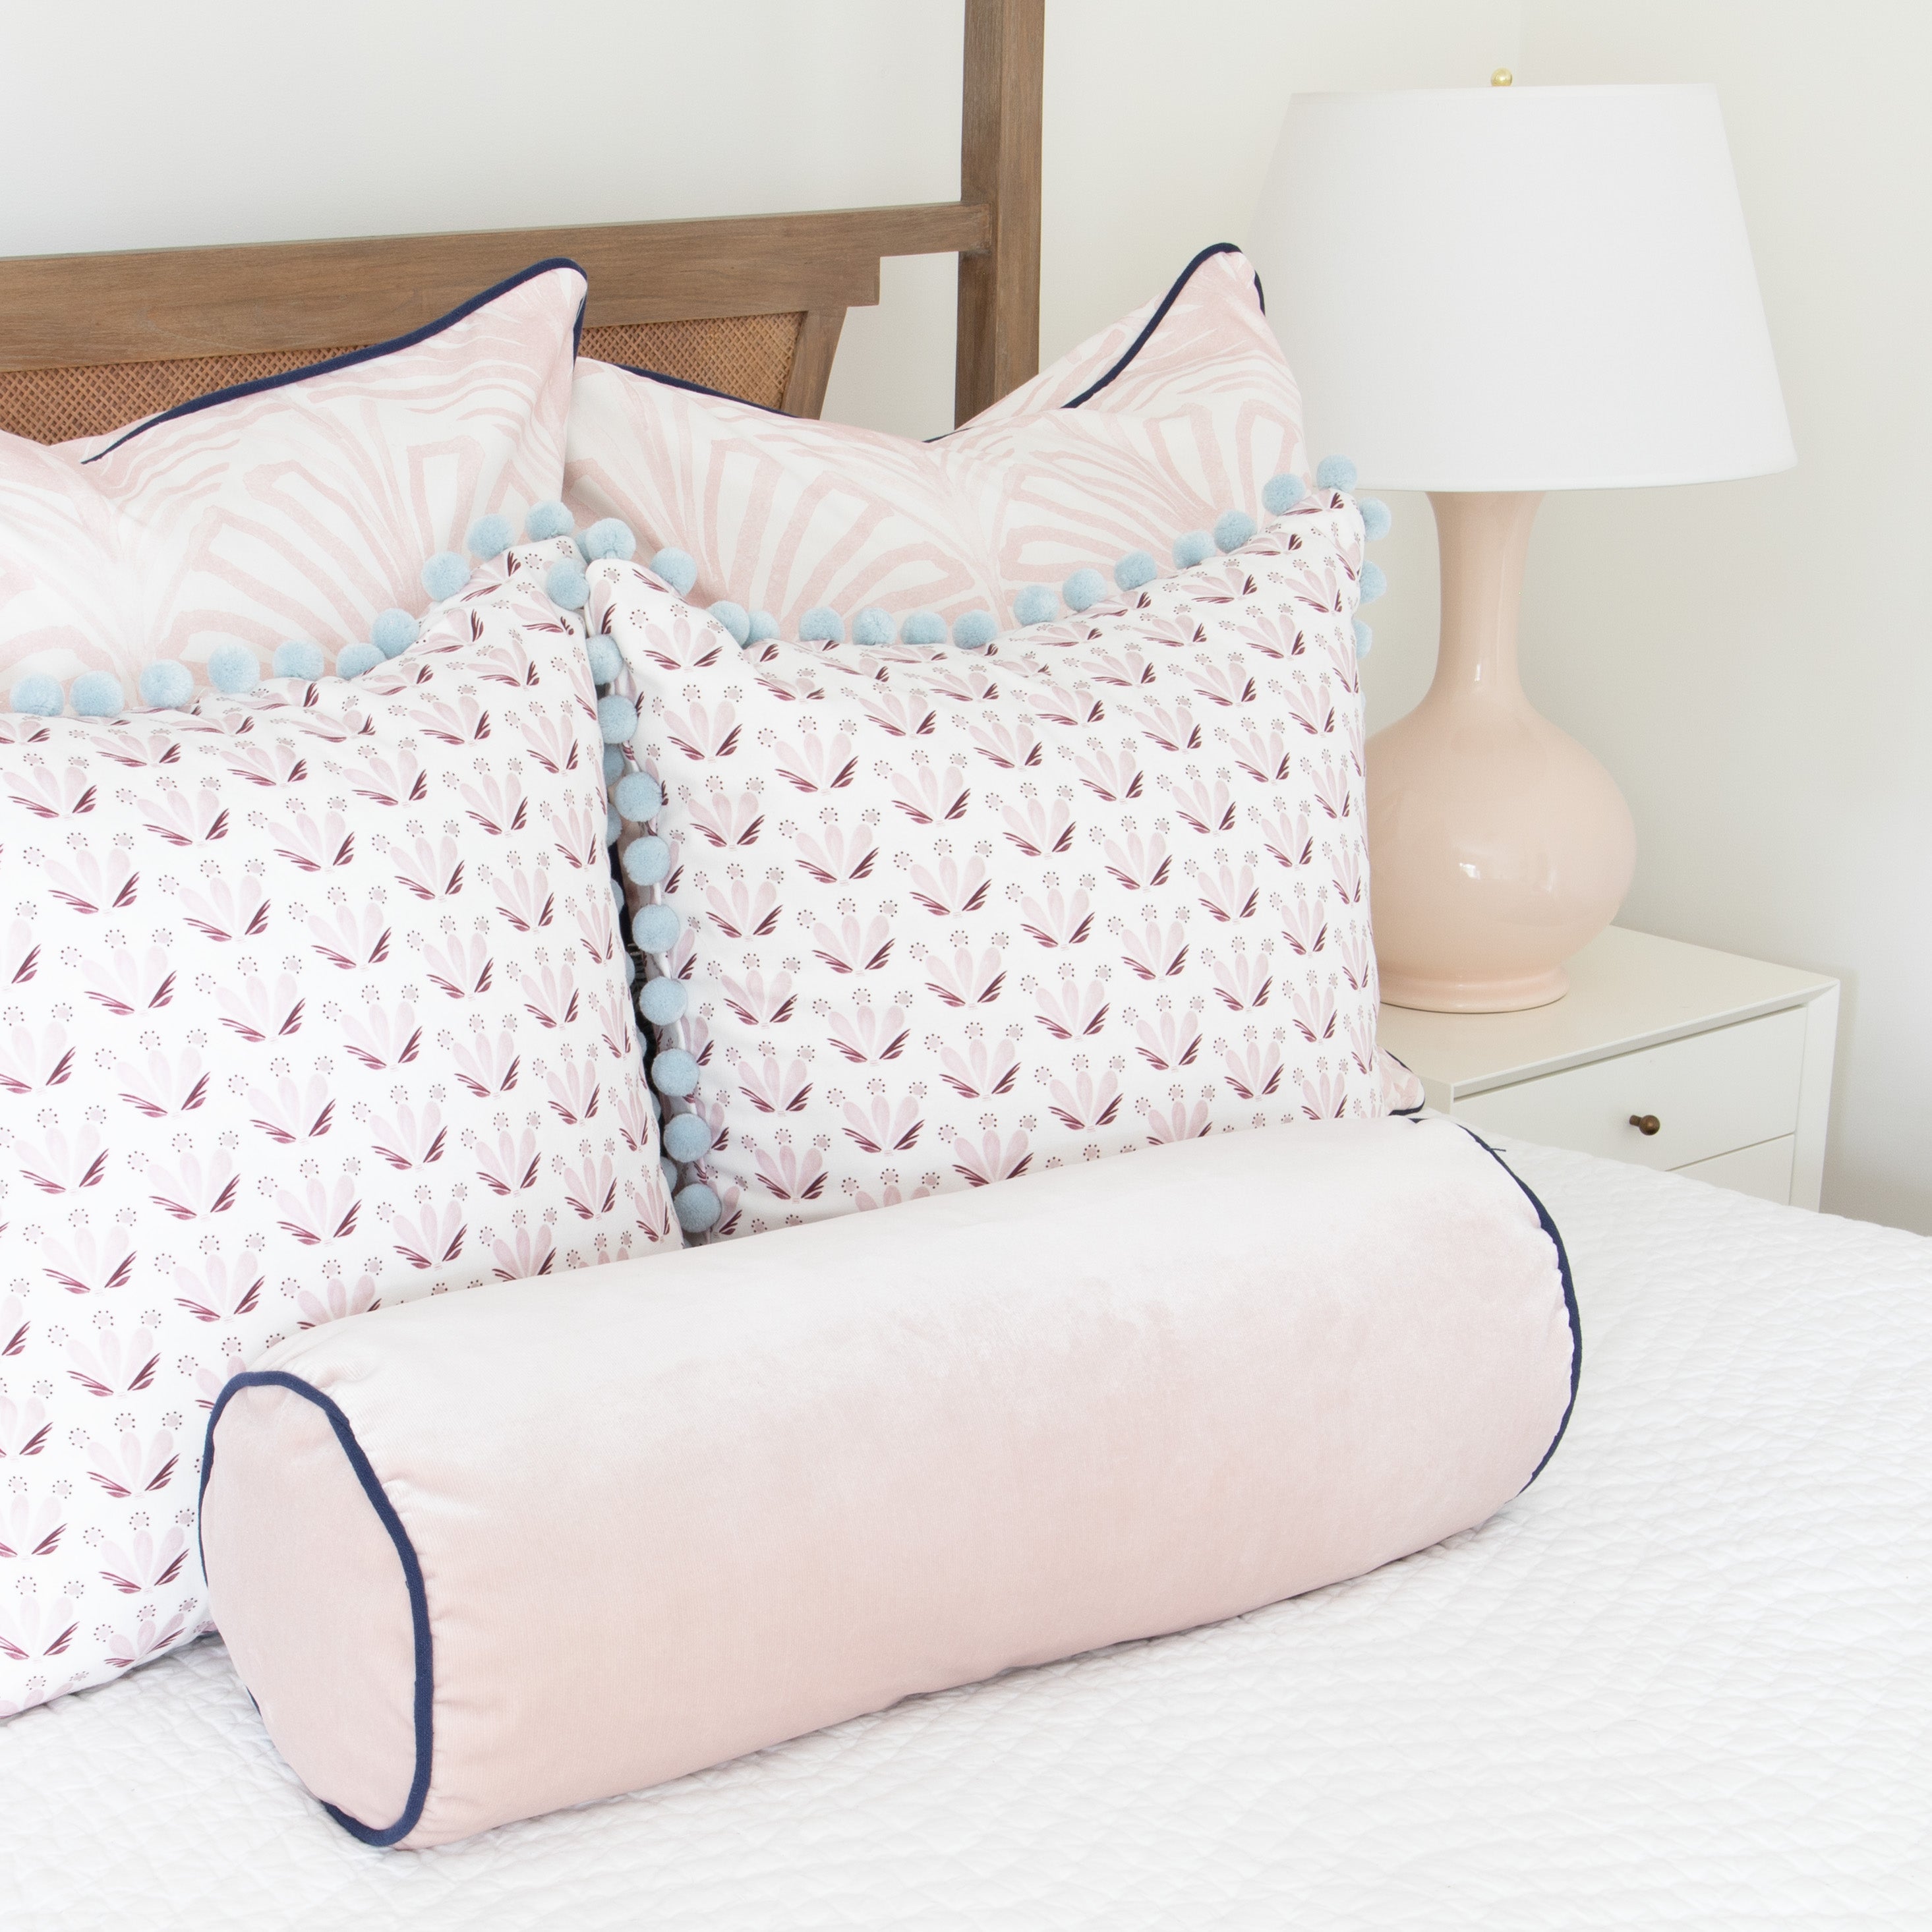 close up of bed with white bedding, pink palm pillows, pink and burgundy floral drop repeat pillows with blue pom poms, and a pink velvet bolster pillow on the bed